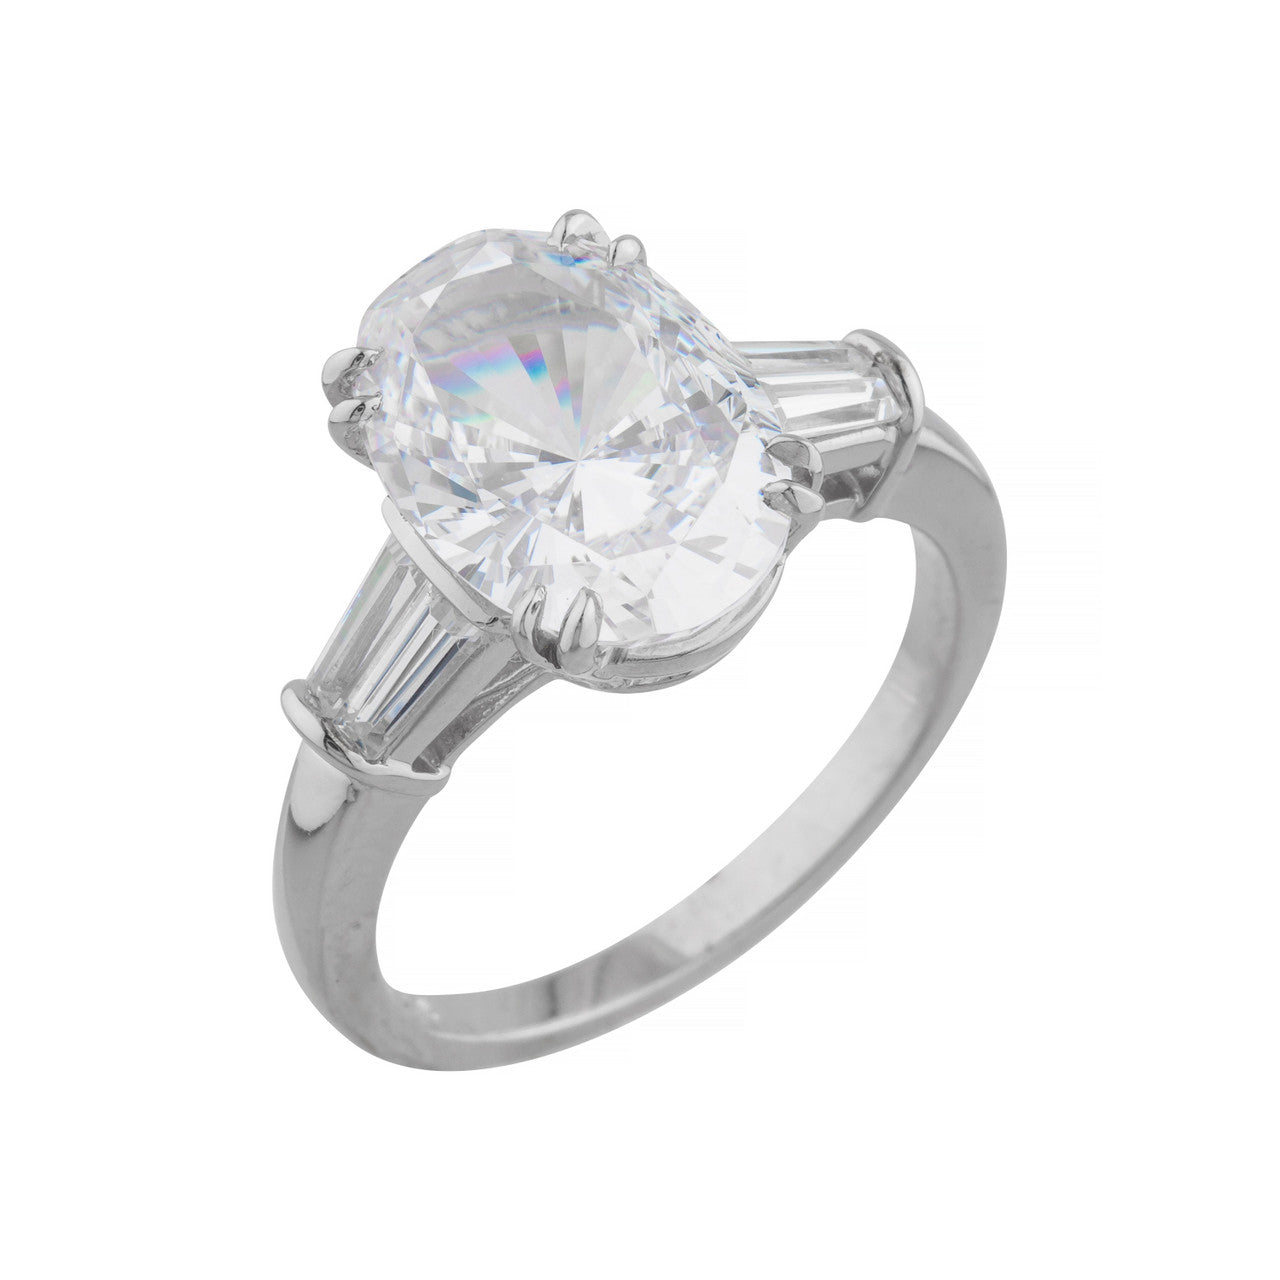 Fantasia F1477 Large Oval with Baguette Sides Ring